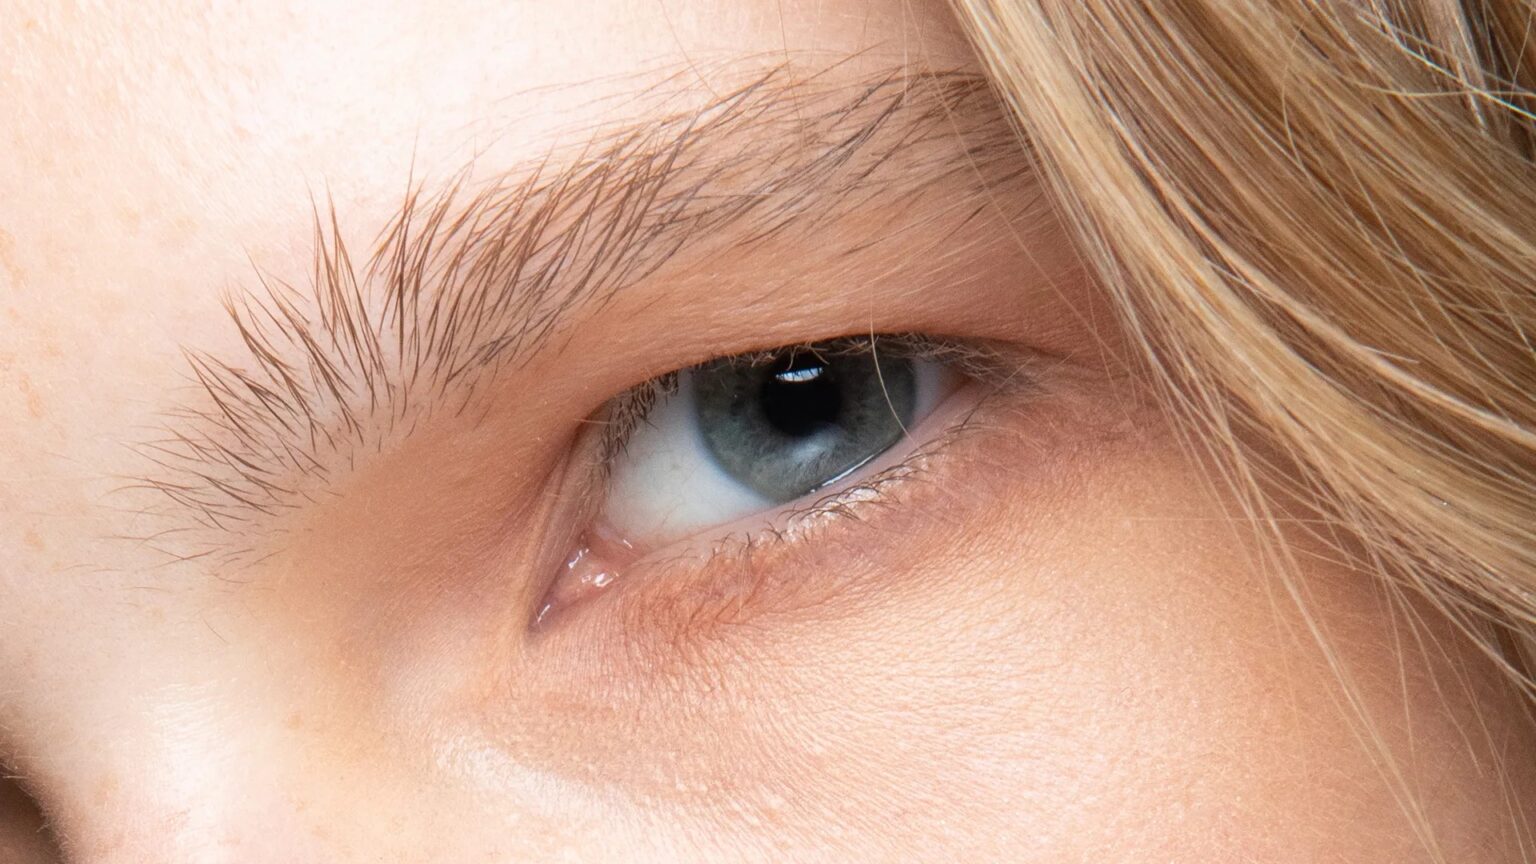 From simple home remedies to topical treatments and surgery, there are many options available. Here's how to treat under eye bags.